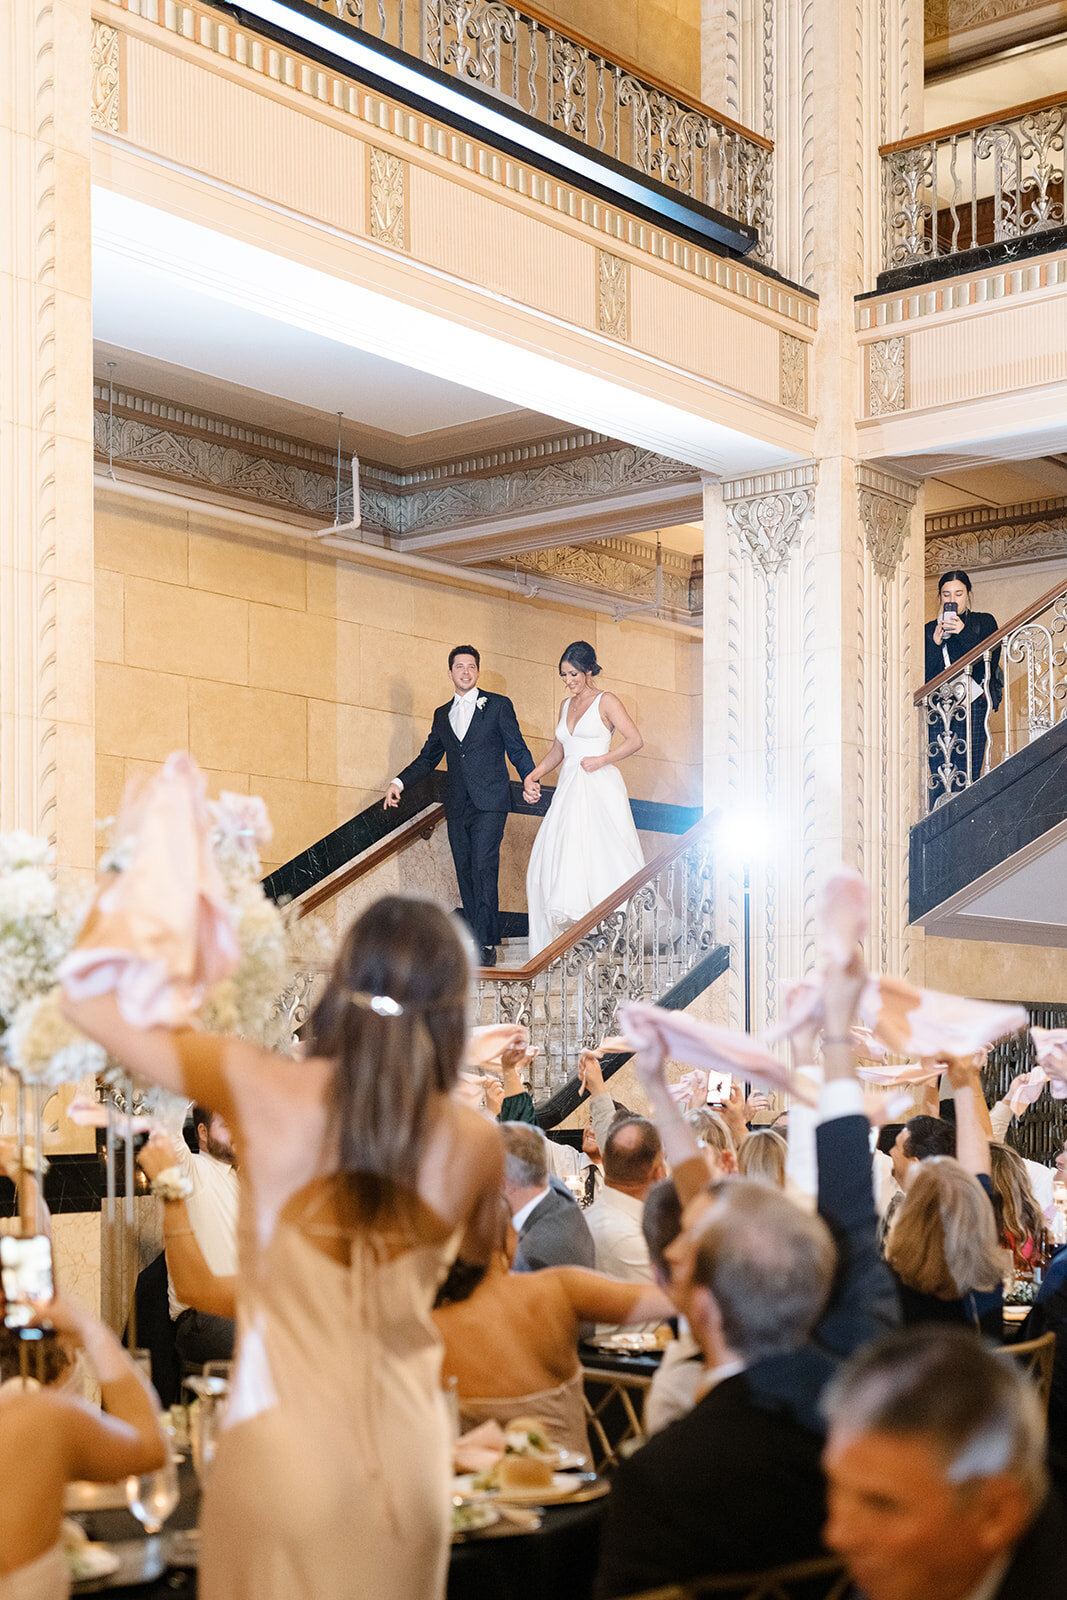 Kylie and Jack at The Grand Hall - Kansas City Wedding Photograpy - Nick and Lexie Photo Film-817